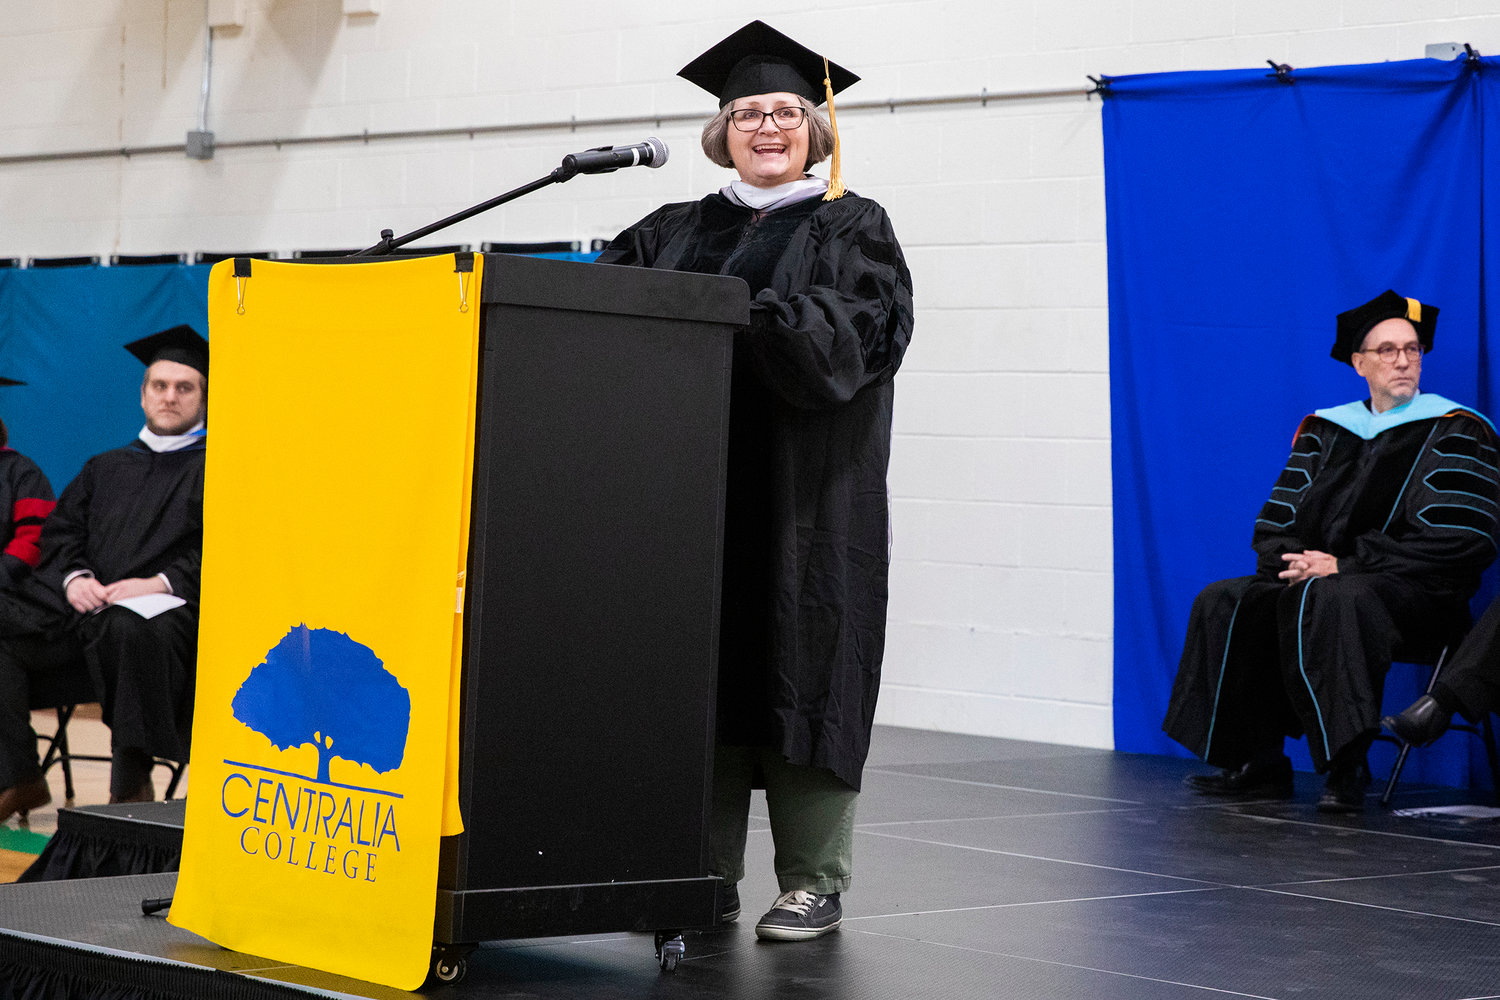 Dr. Jody Peterson smiles and describes working with all nine Centralia College graduates over the last two quarters during a graduation ceremony held at the Green Hill School on Wednesday in Chehalis.